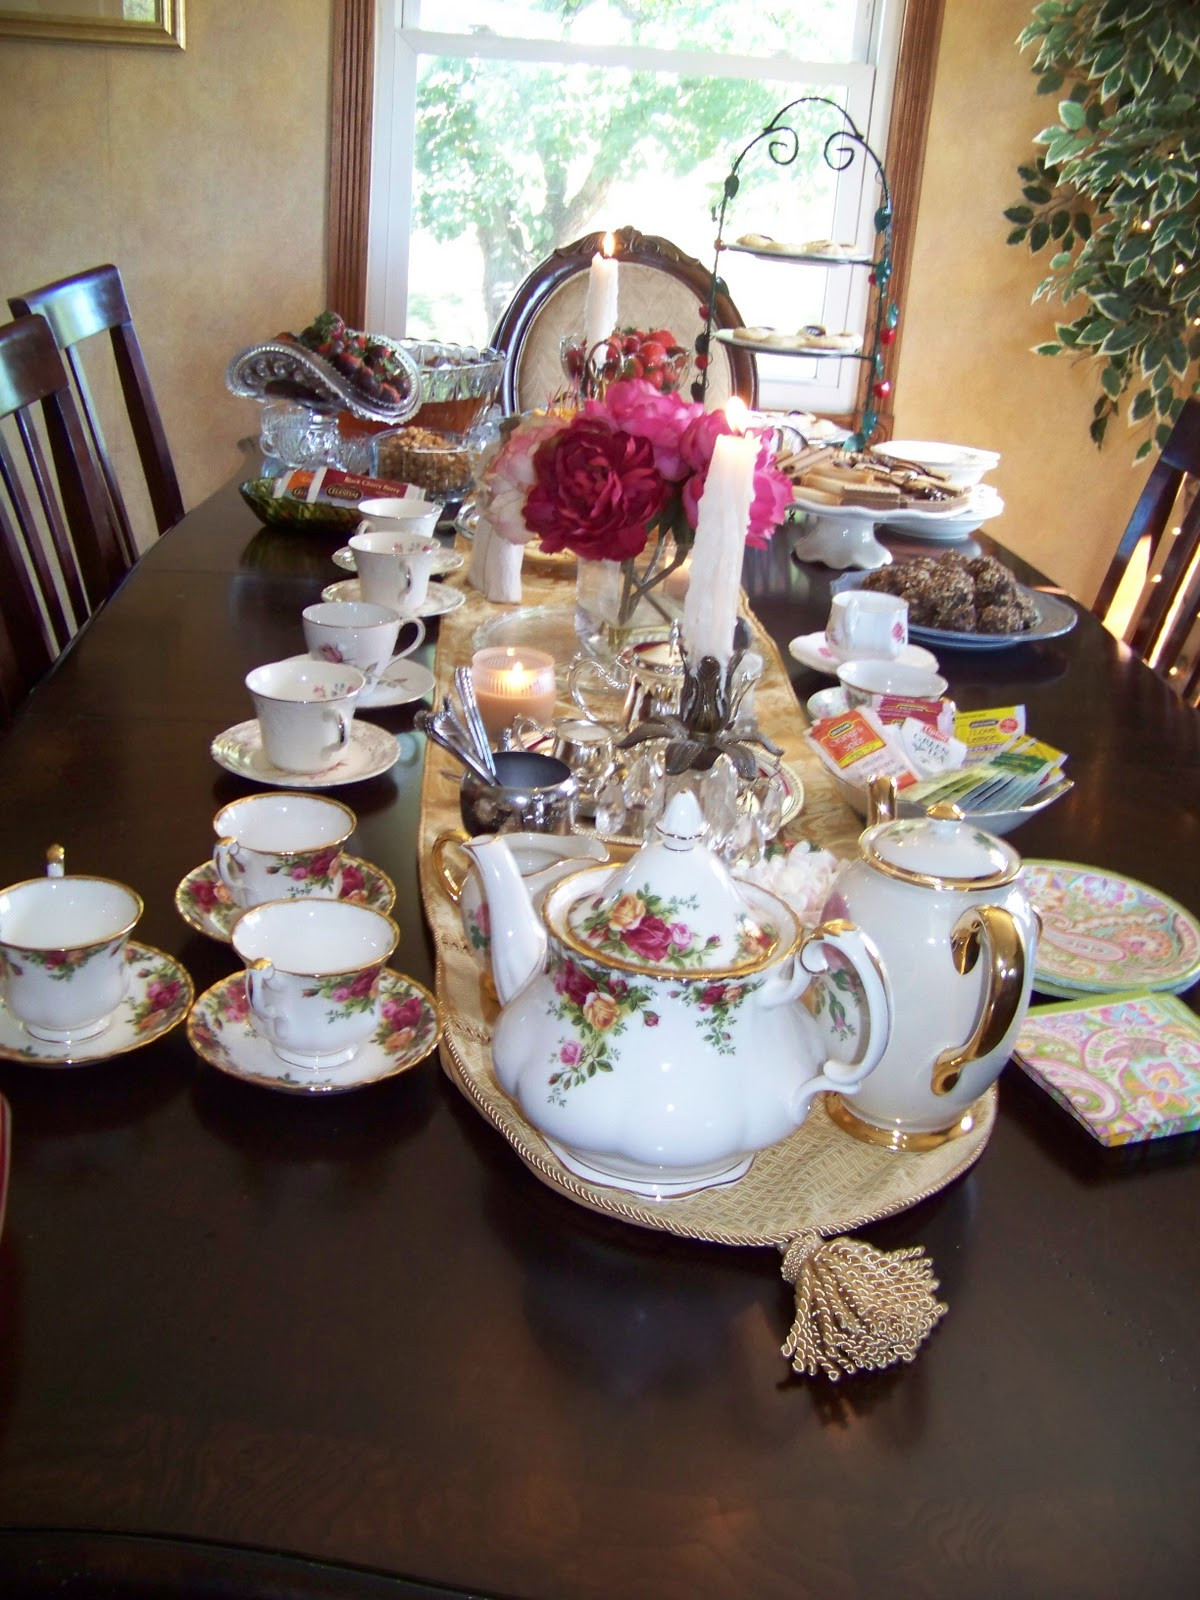 Christian Tea Party Ideas
 A Wise Woman Builds Her Home HomeBuilders and La s Tea